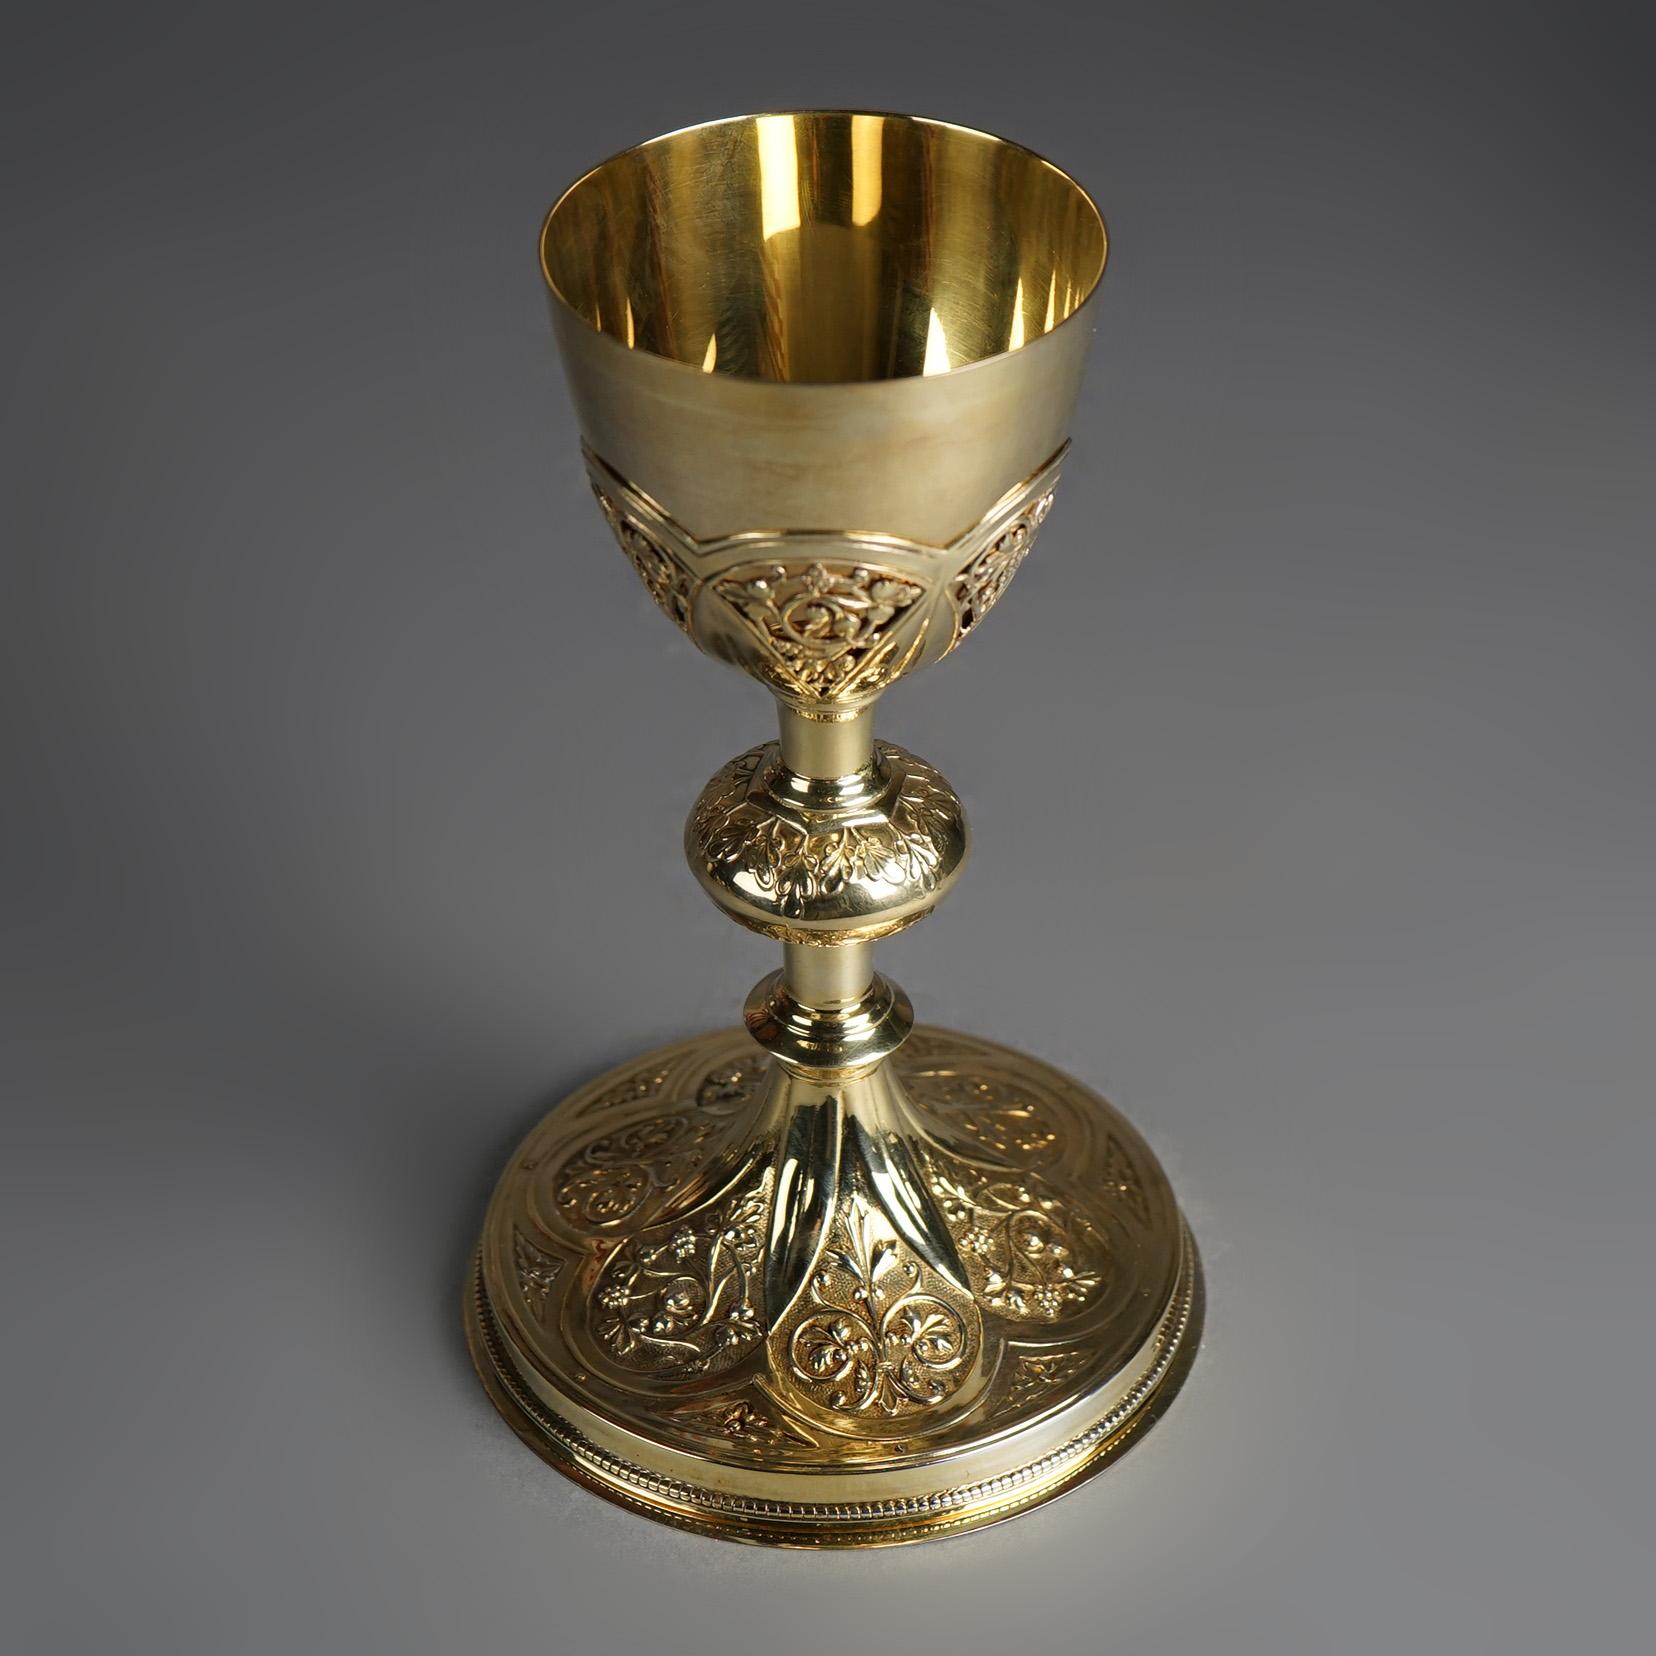 Gold Wash Floral Engraved Silver Religious Offering Chalice with Hallmark & Case In Good Condition For Sale In Big Flats, NY